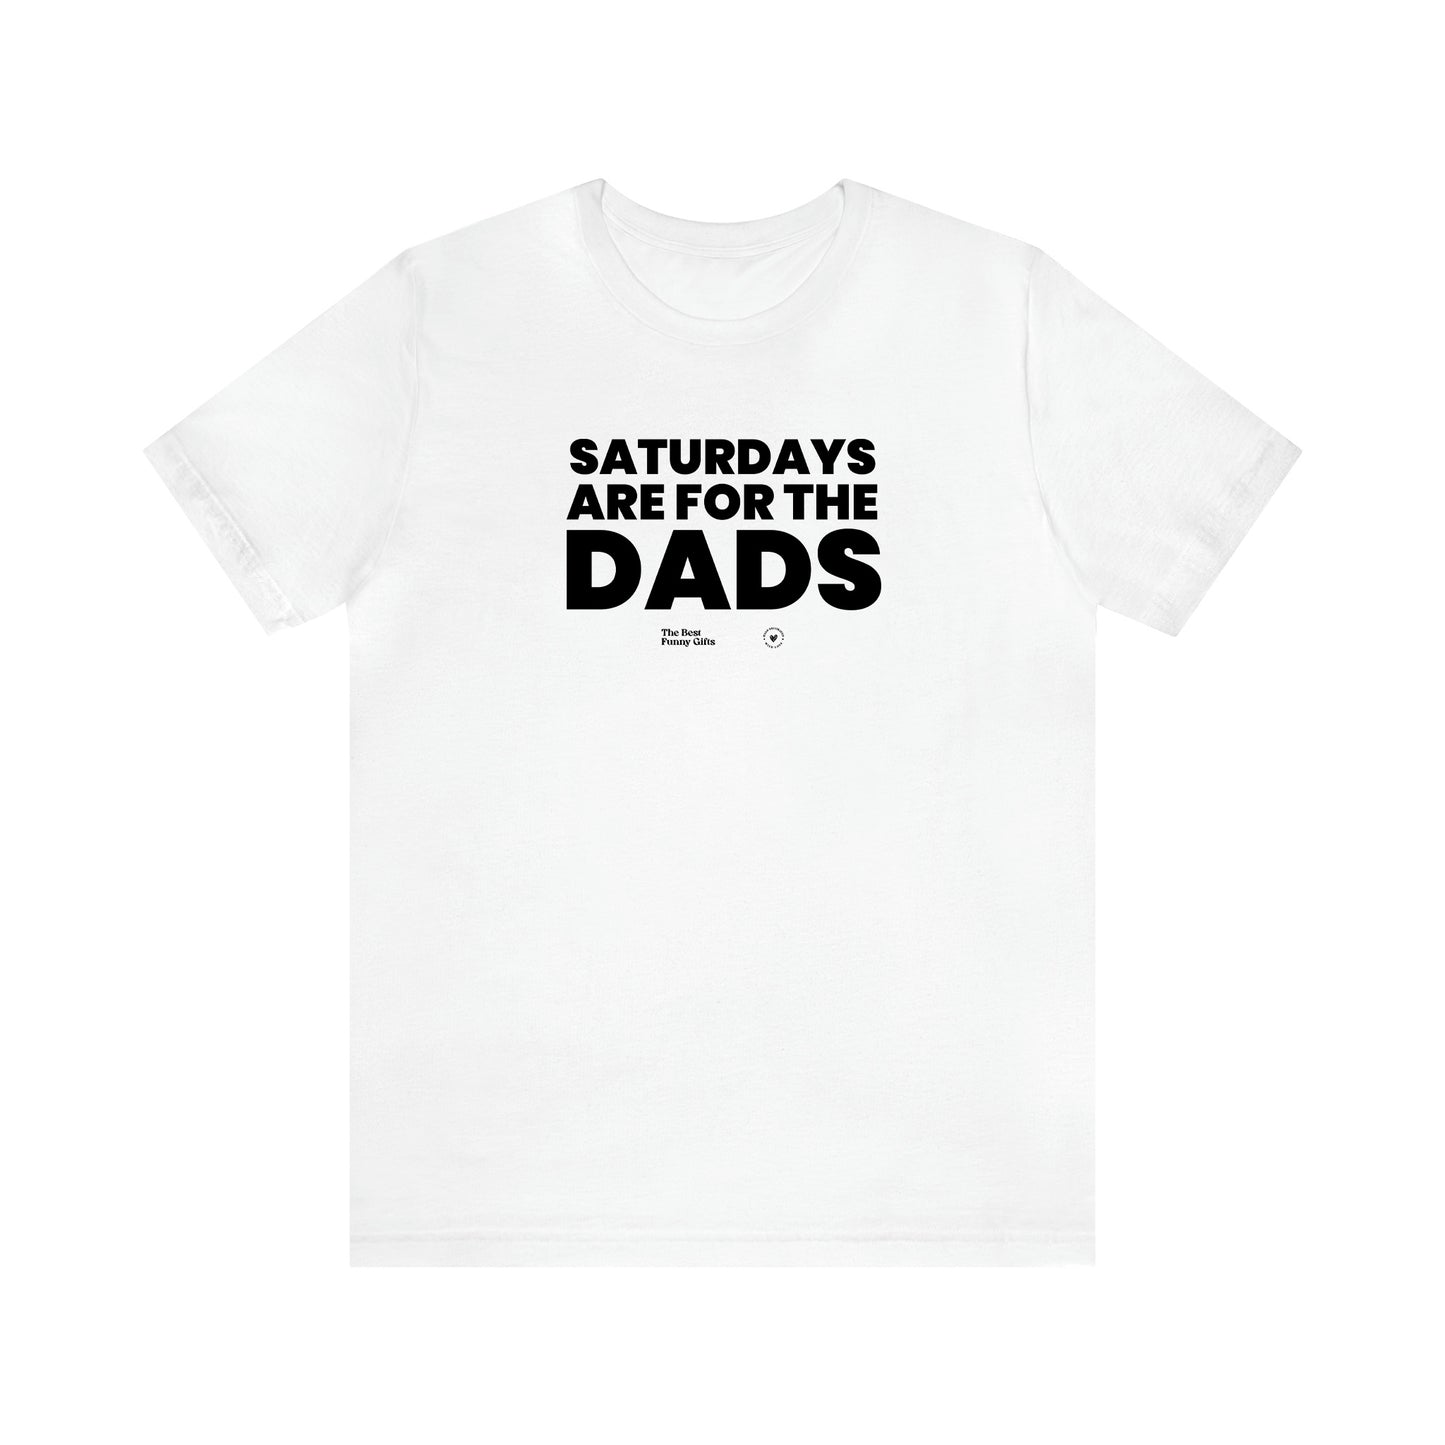 Men's T Shirts Saturdays Are for the Dads - The Best Funny Gifts